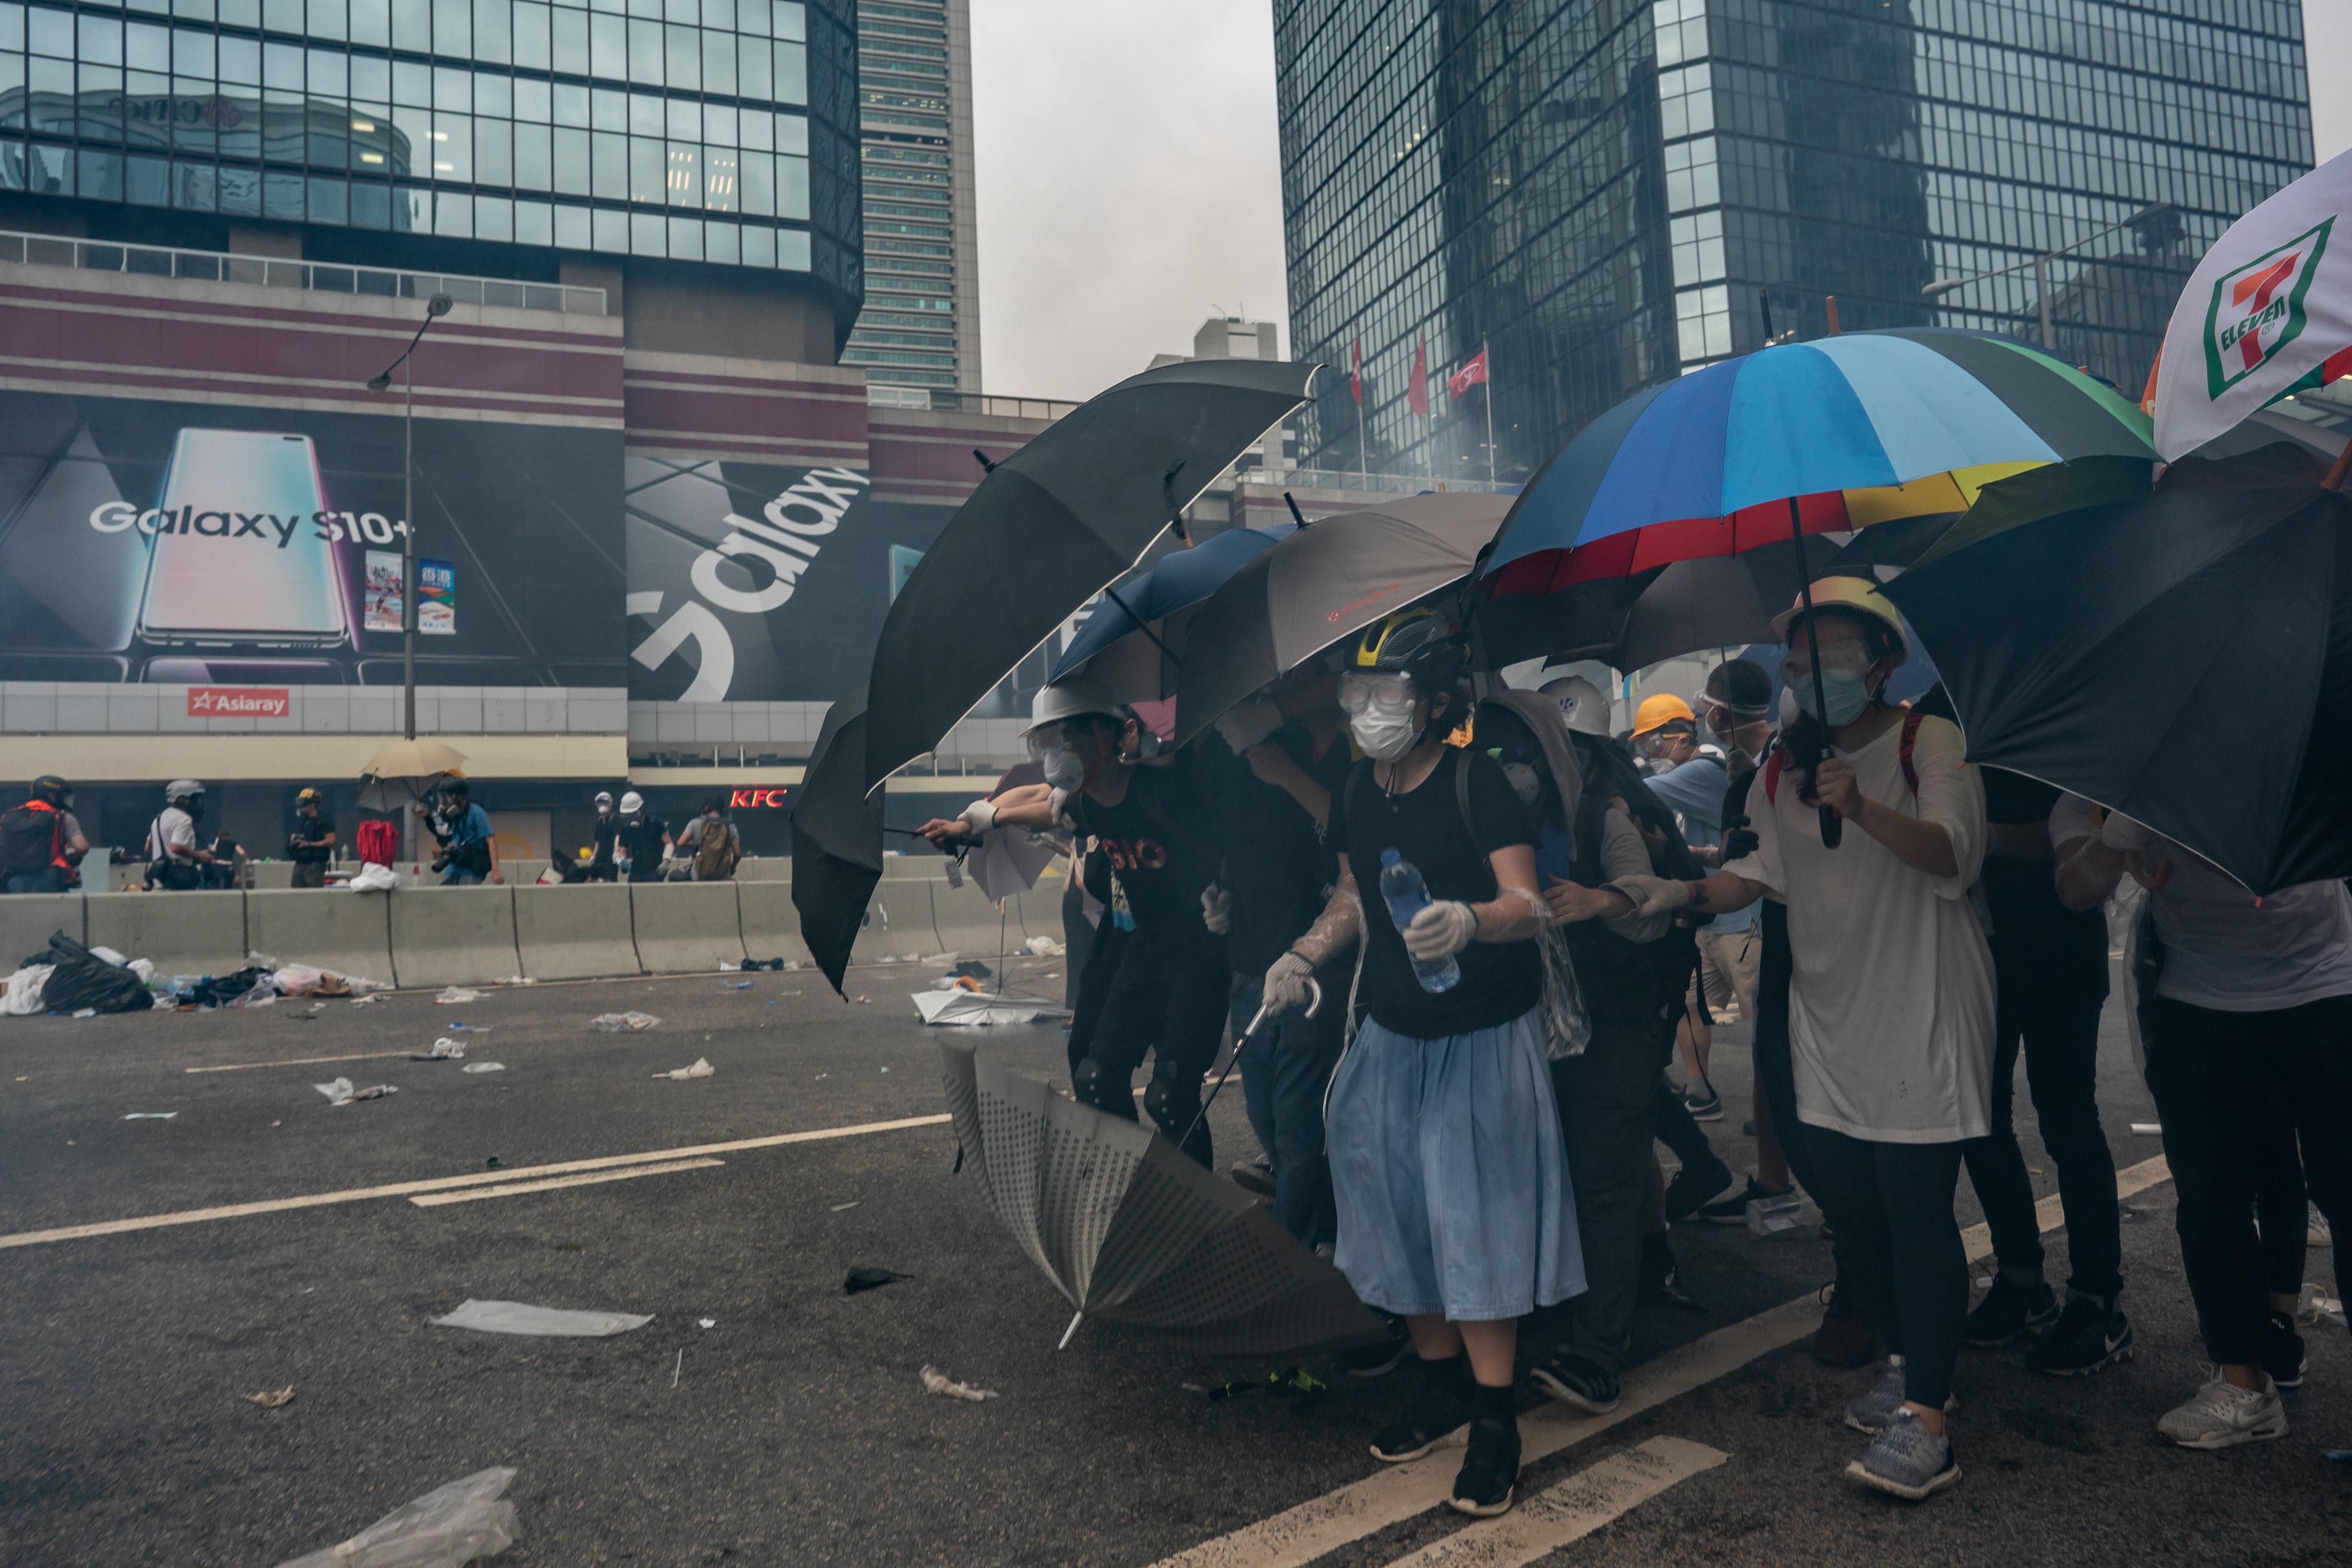 Protesters hold umbrellas as teargas is fired.